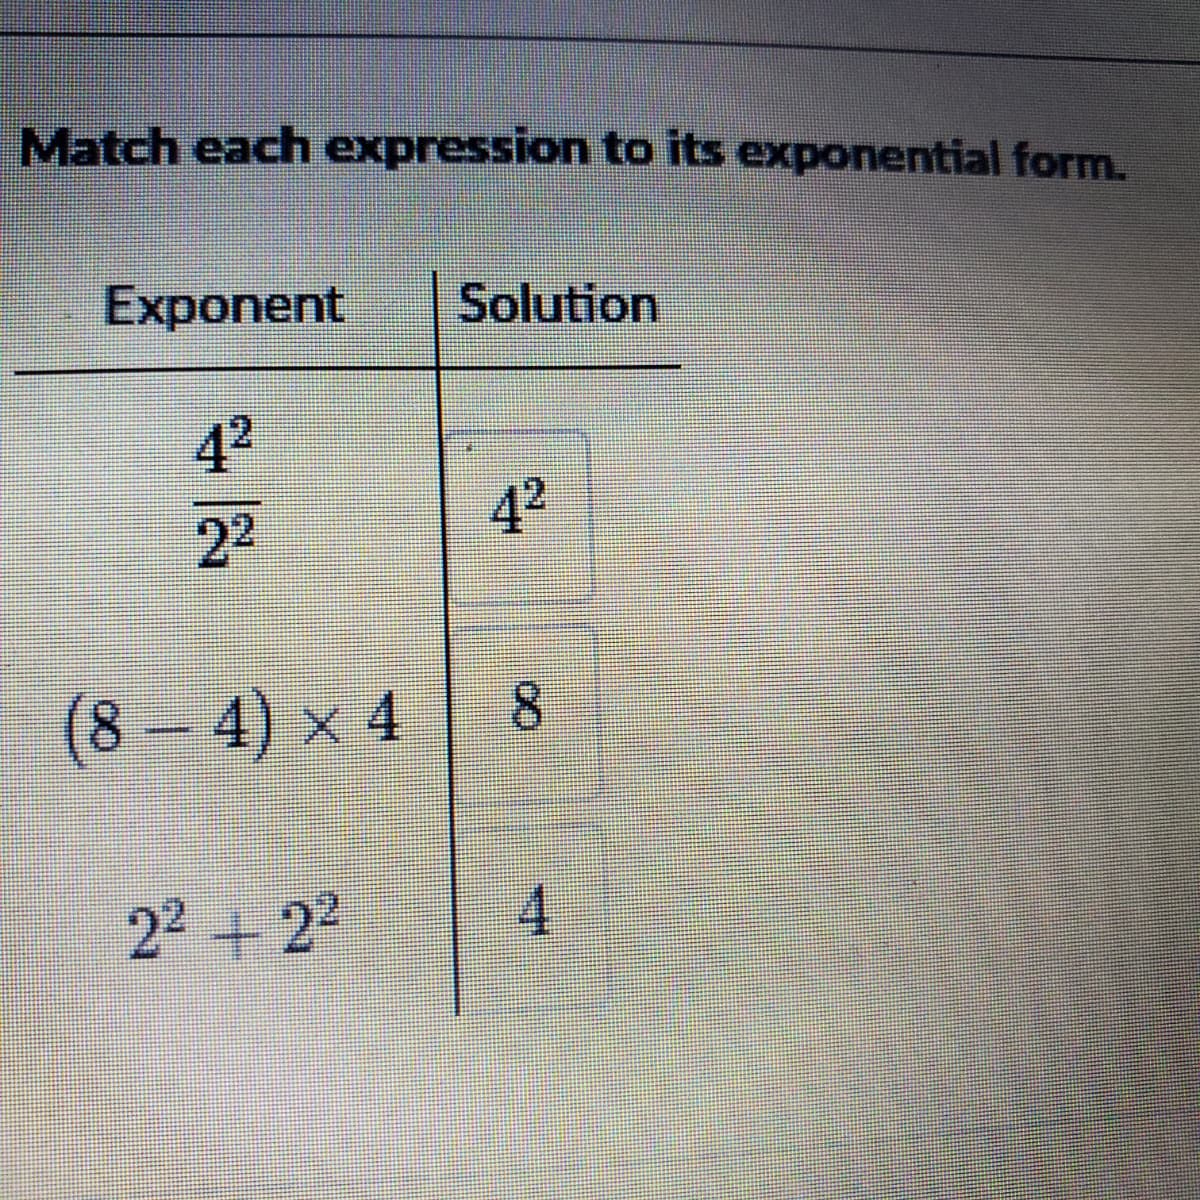 Match each expression to its exponential form.
Exponent
Solution
42
42
22
(8 – 4) x 4
8.
22 +2
4.
